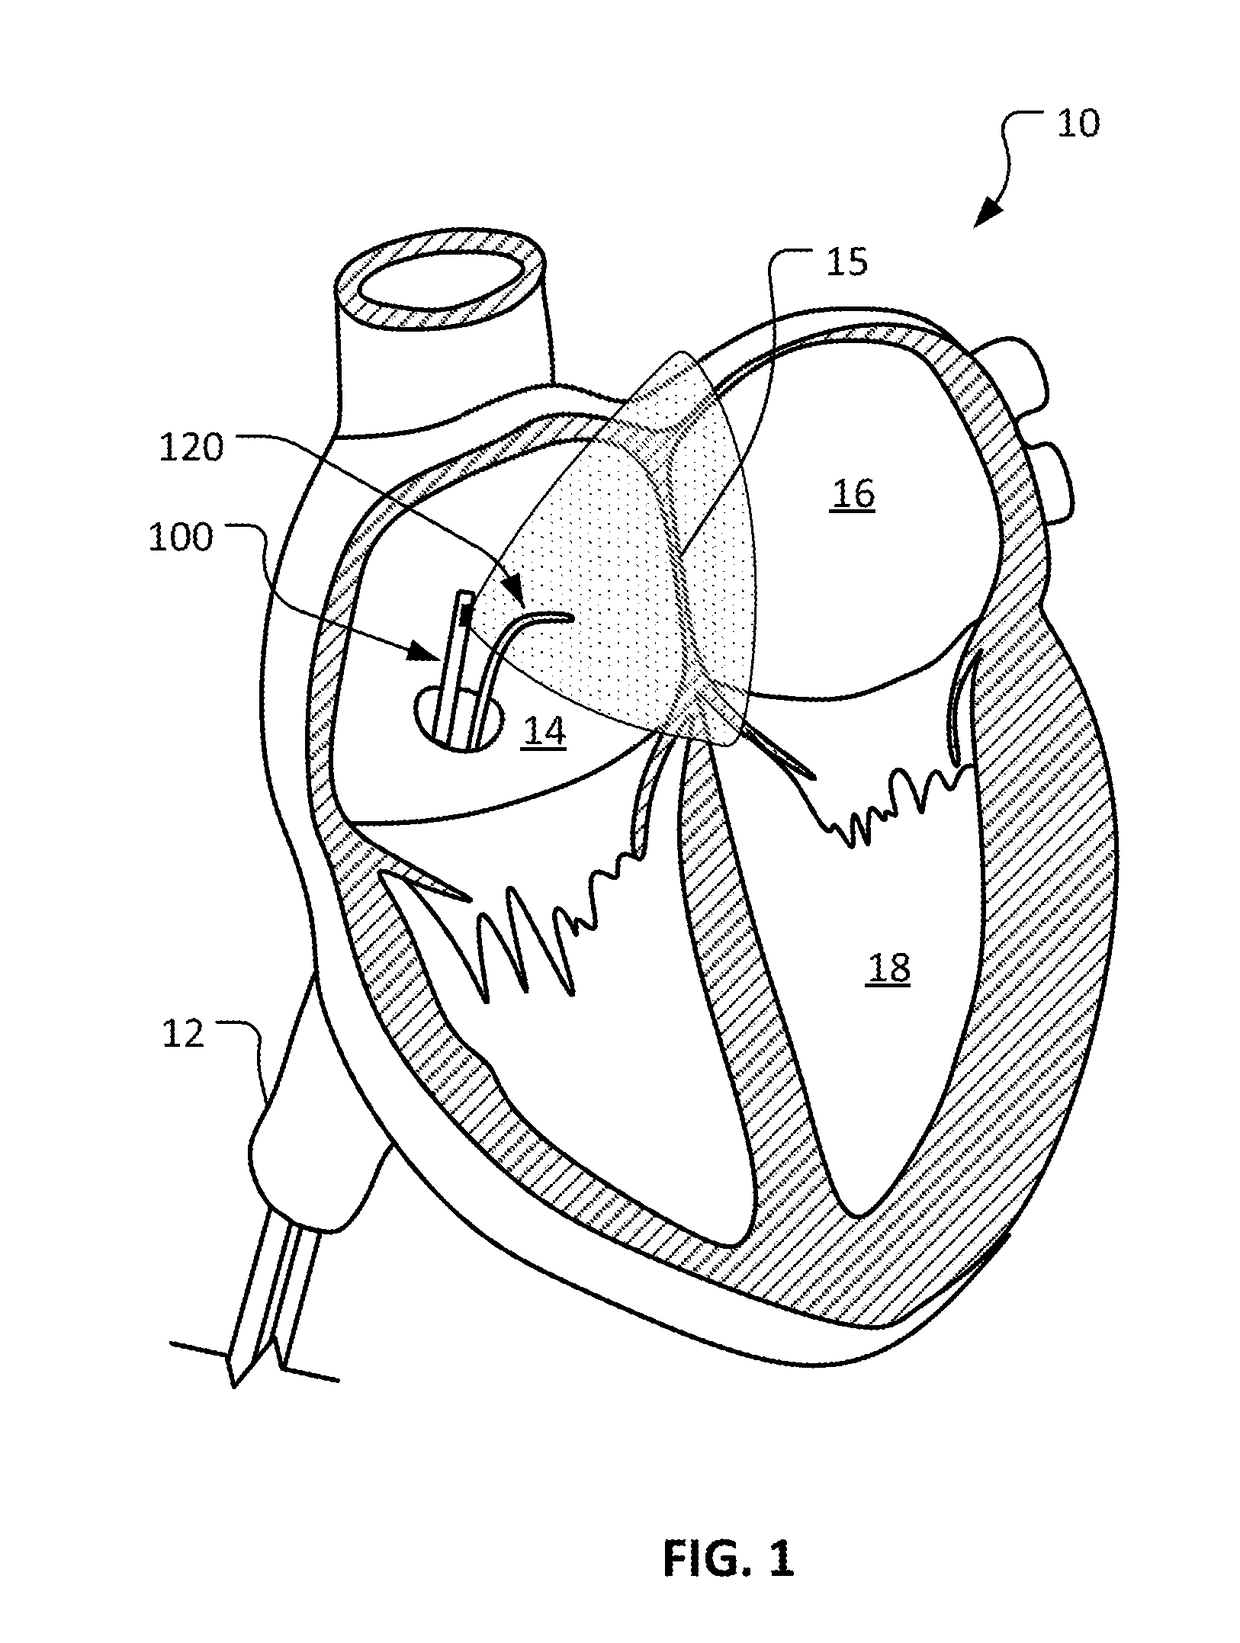 Intra-cardiac echocardiography with magnetic coupling